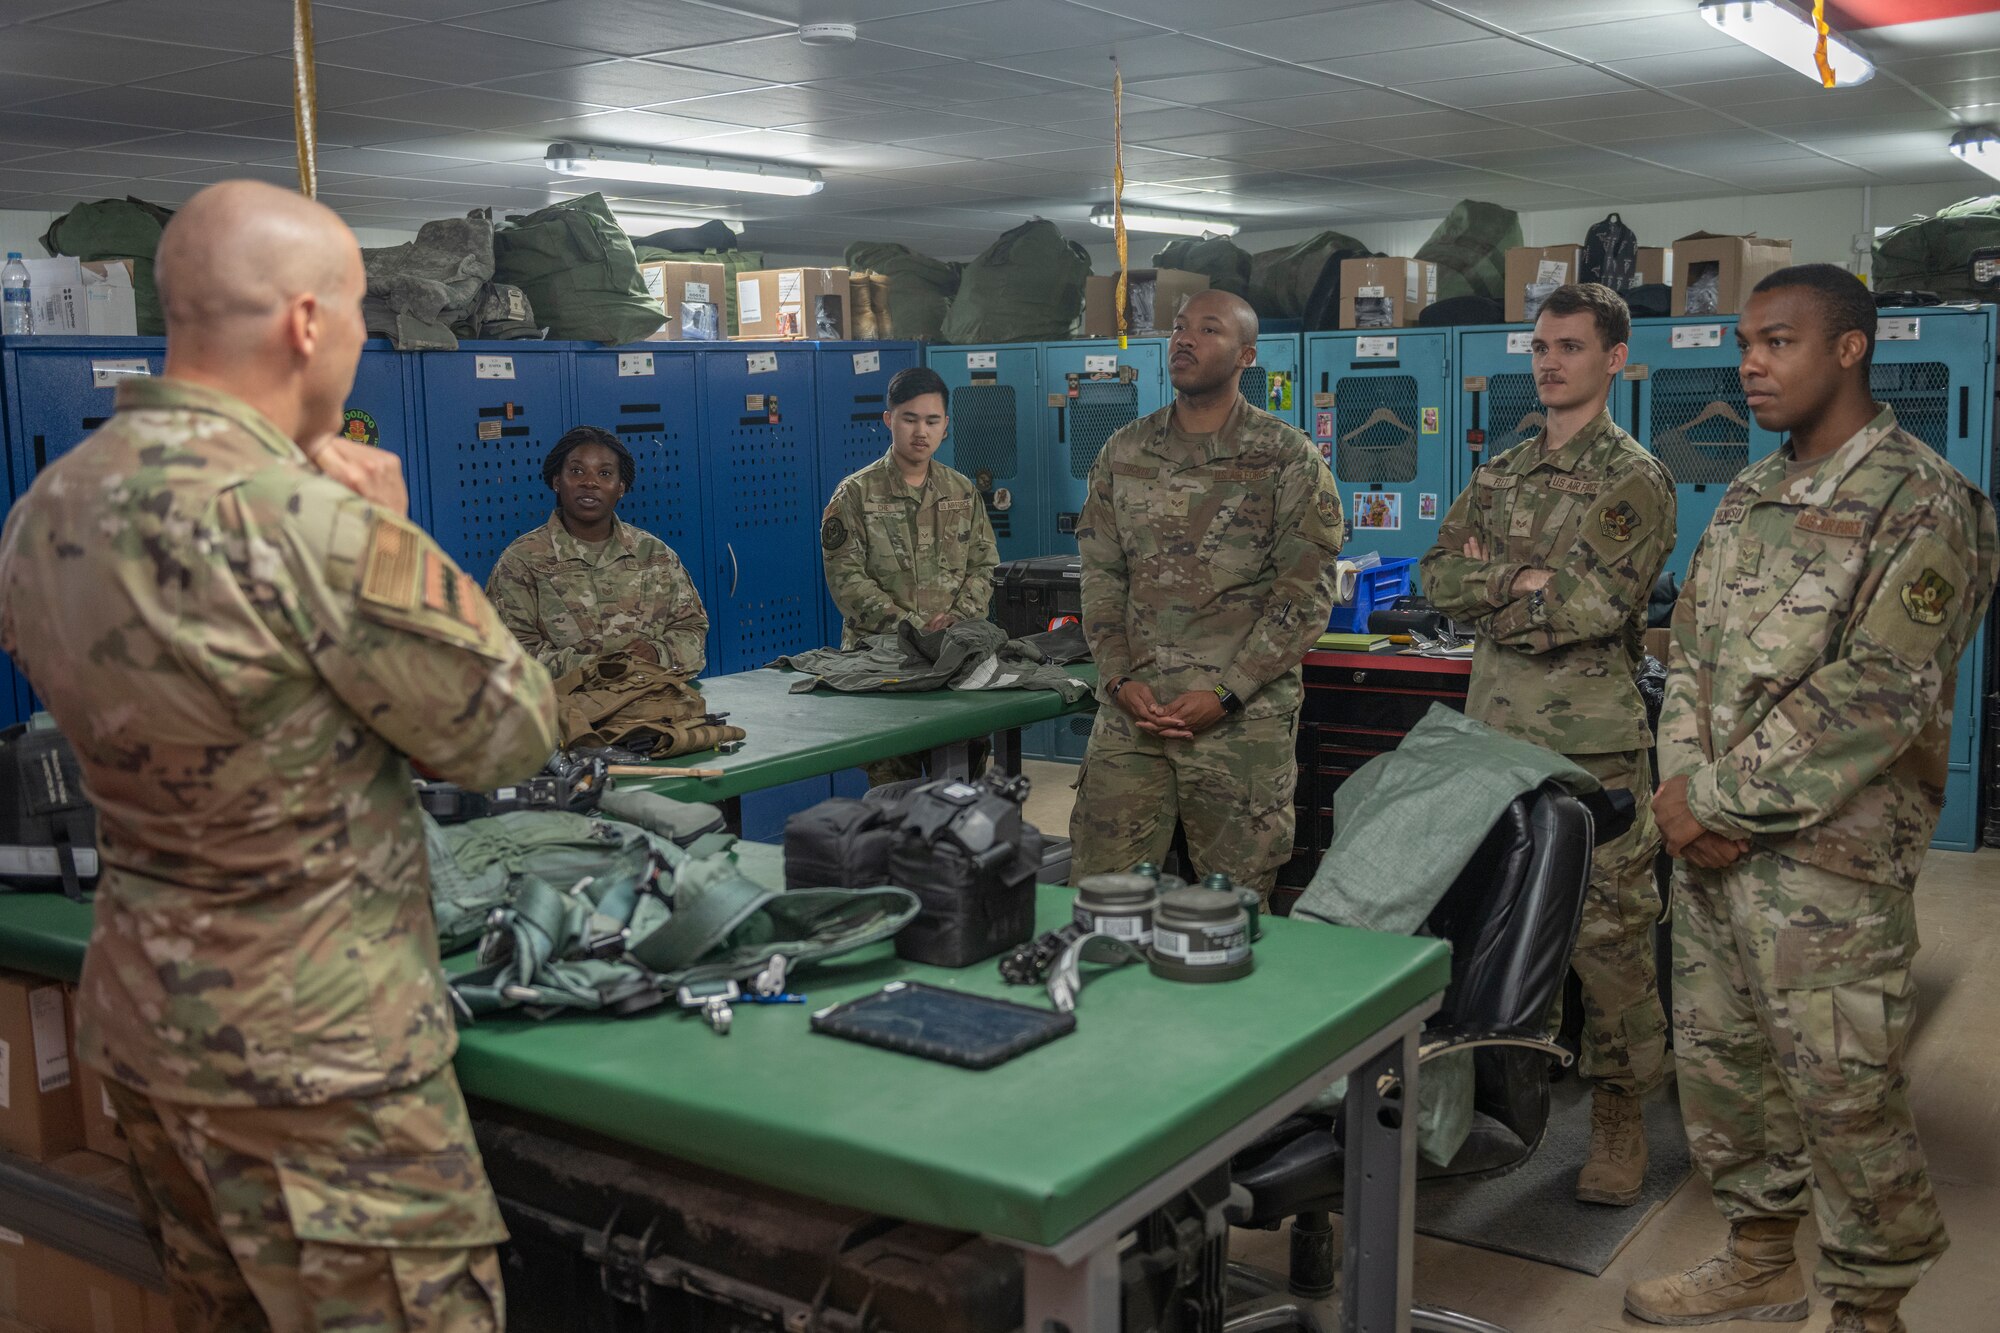 U.S. Air Force Chief Master Sgt. Sean Milligan, left, 332nd Air Expeditionary Wing command chief, interacts with the 494th Expeditionary Fighter Squadron aircrew flight equipment team Sept. 4, 2021, at an undisclosed location somewhere in Southwest Asia. Aircrew flight equipment technicians ensure pilots are equipped with the specific gear needed to perform their missions. (U.S. Air Force photo by Senior Airman Cameron Otte)